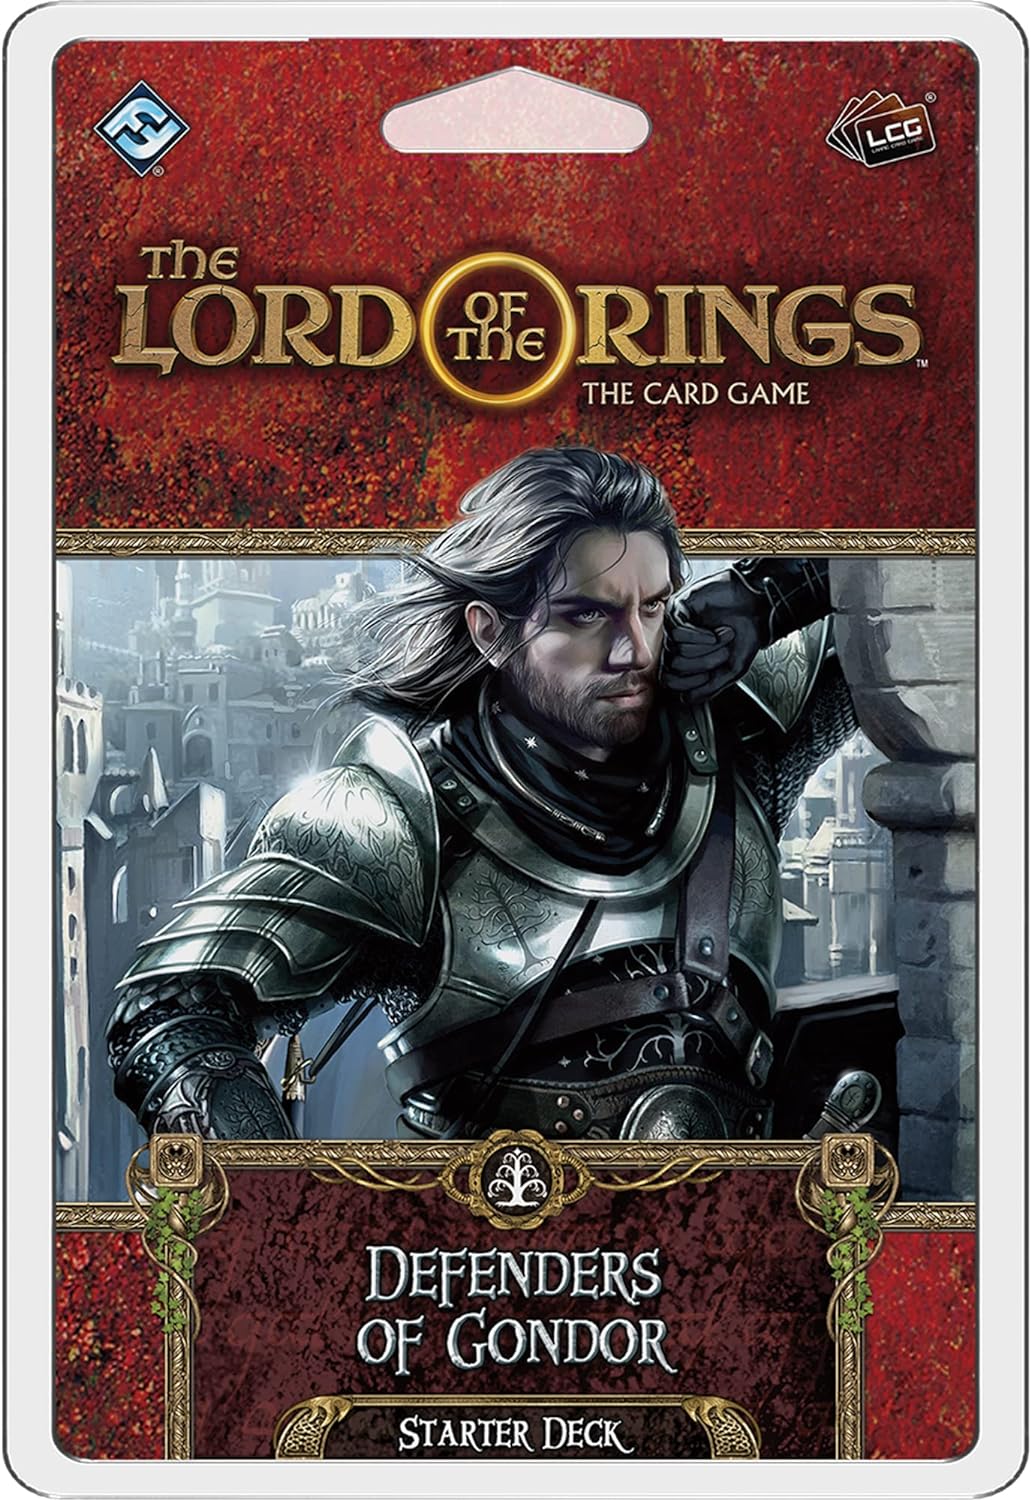 The Lord of the Rings Defenders of Gondor Starter Deck